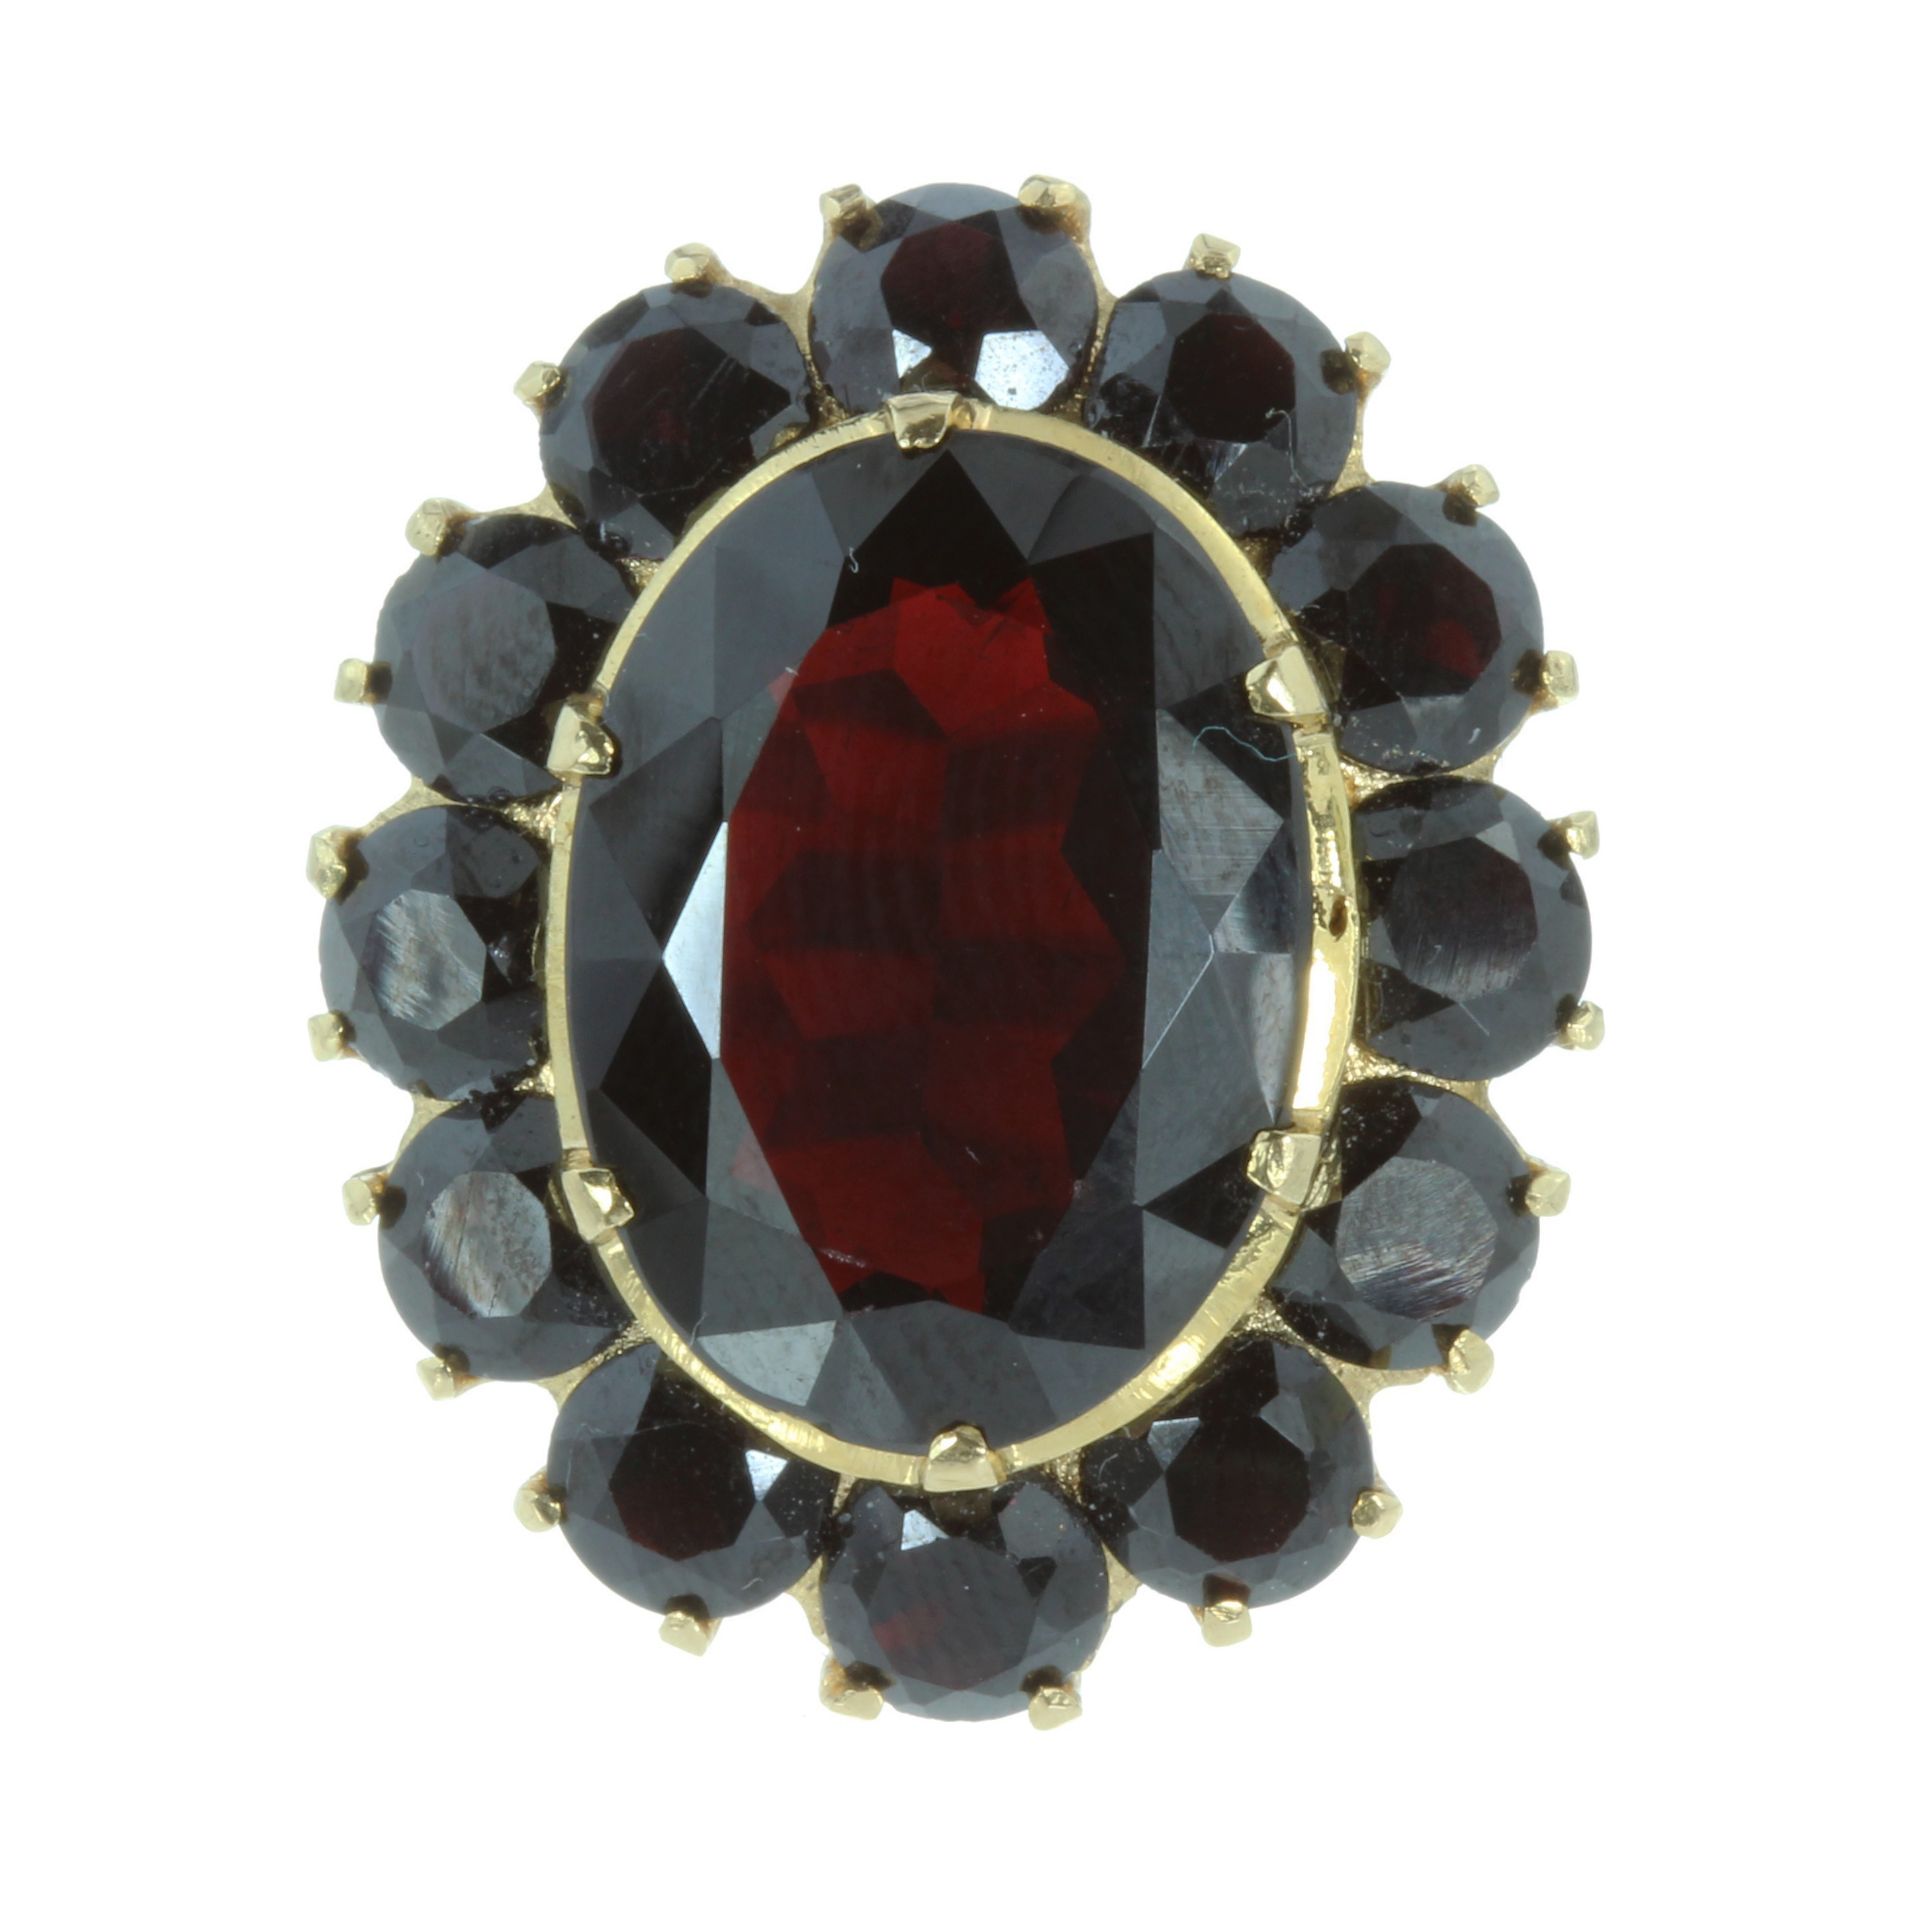 A GARNET CLUSTER COCKTAIL RING set with a large oval cut garnet surrounded by a cluster of twelve